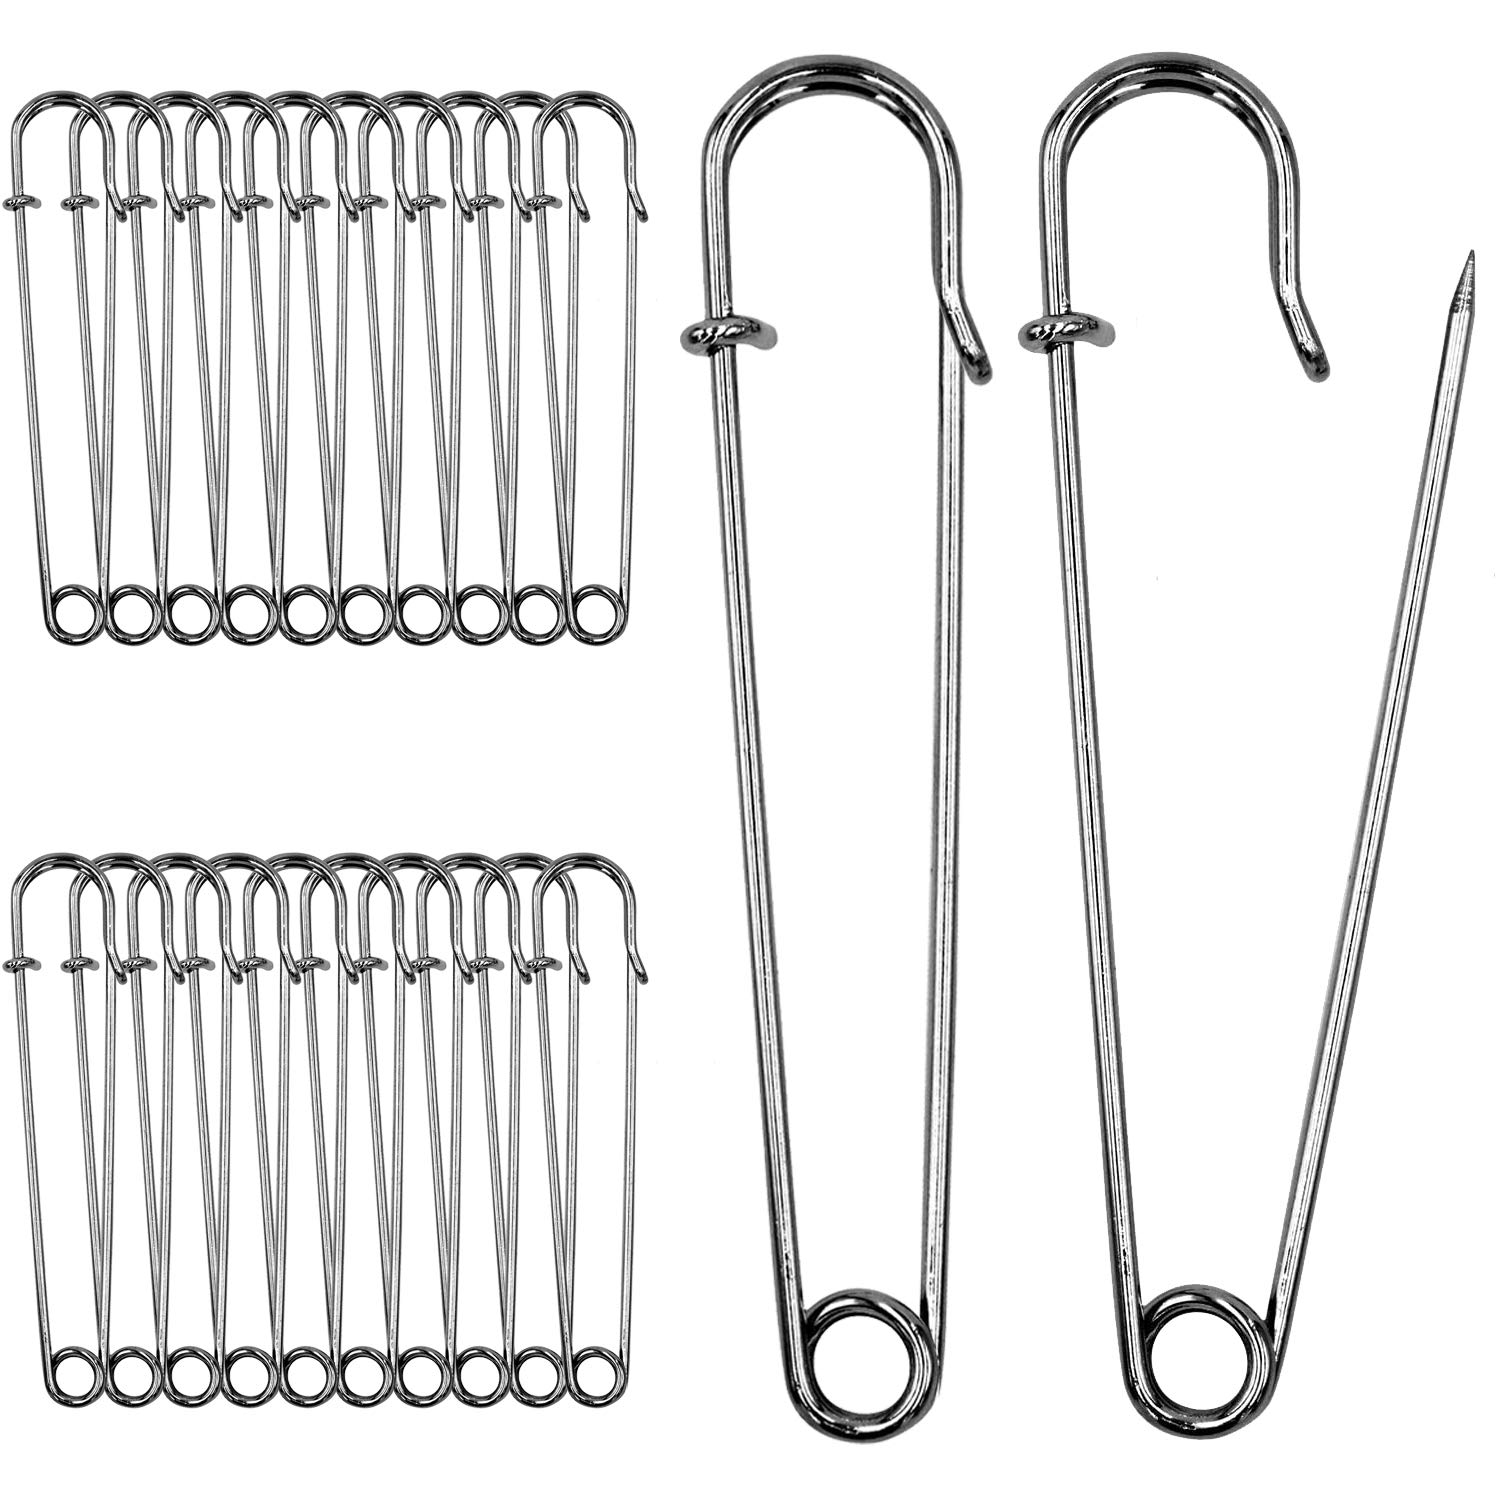 BEADNOVA Small Safety Pins Size 1 Nickel Finish Clothing Pins Safety Pins  for Clothes Garment Art Craft (120pcs, 1.1 Inch, 28mm) - Beadnova